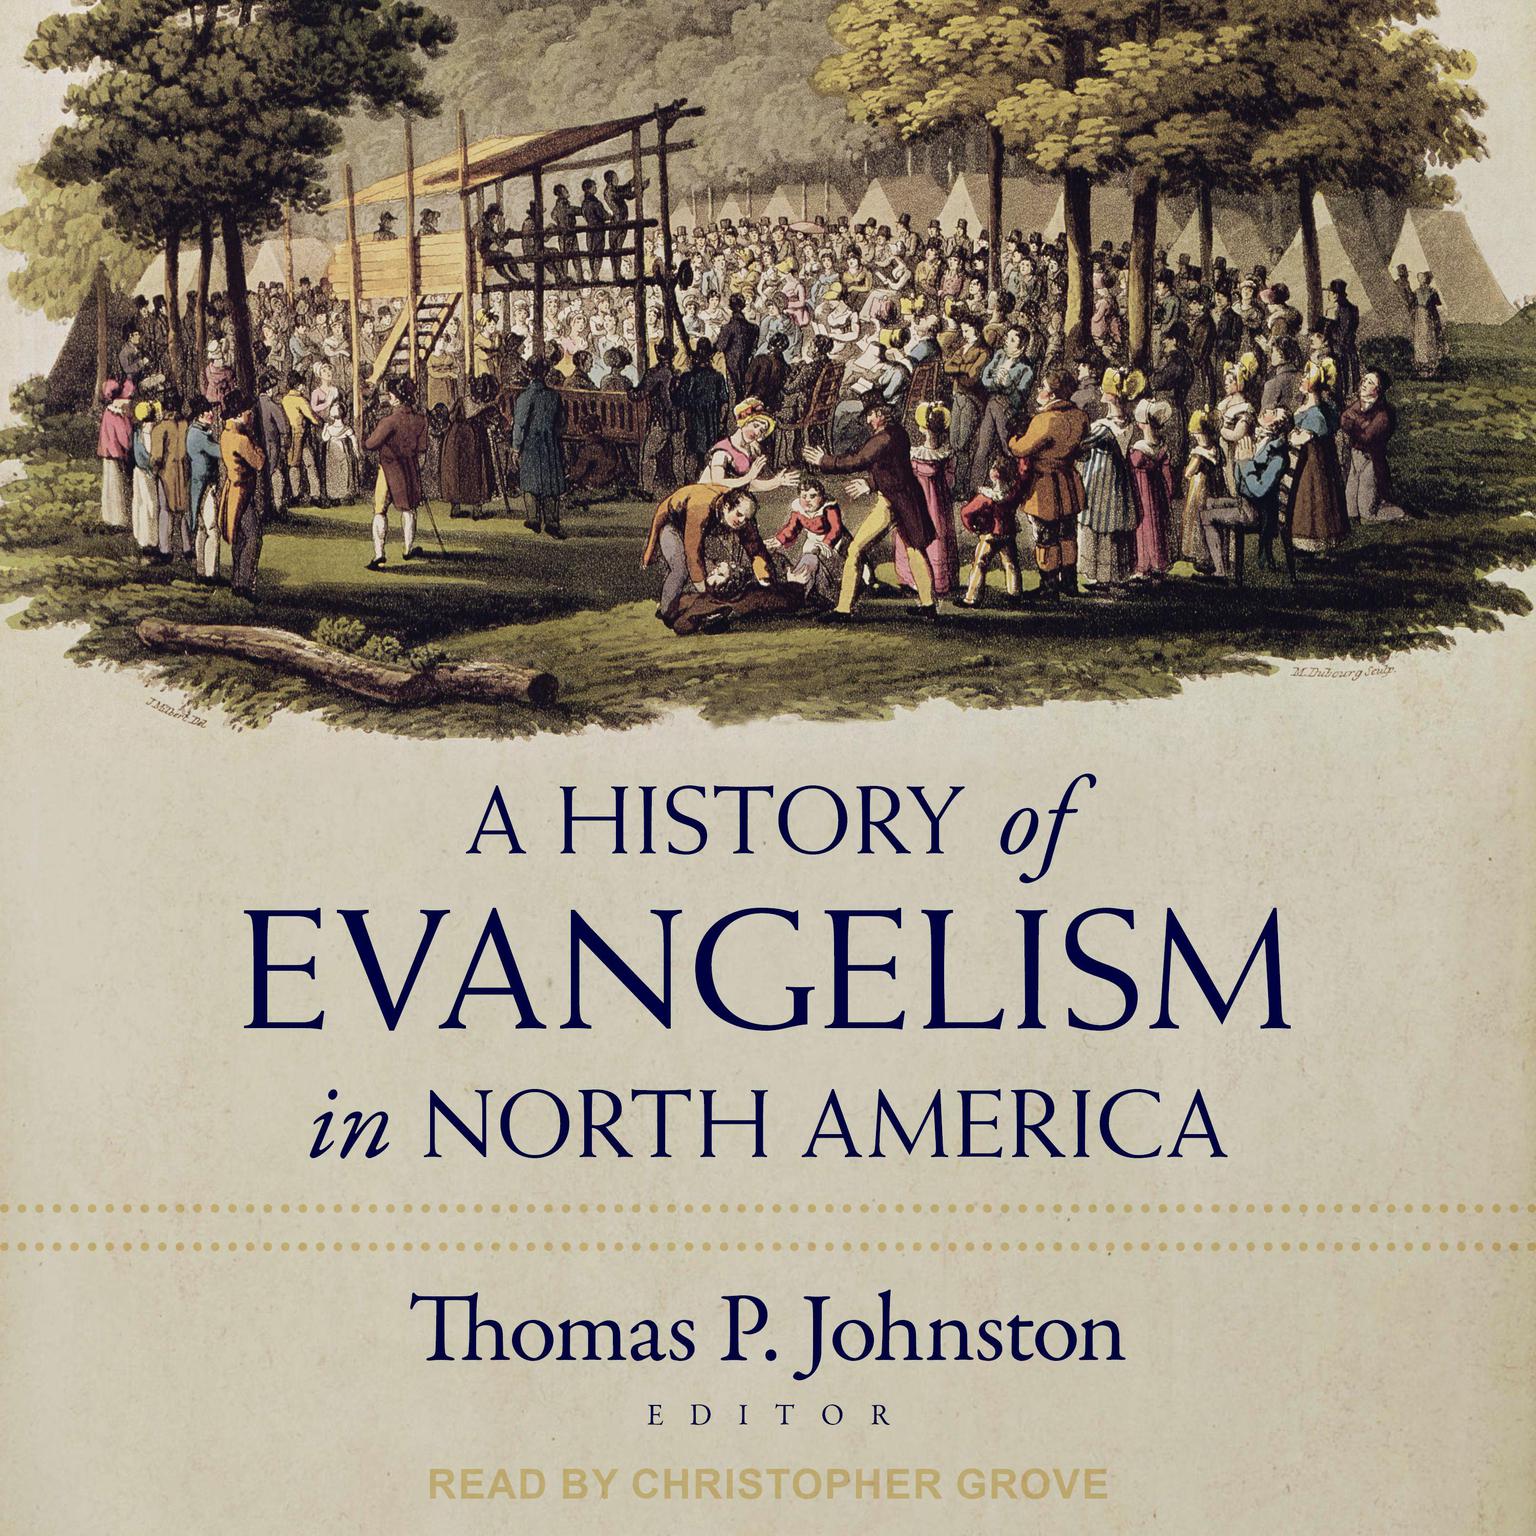 A History of Evangelism in North America Audiobook, by Thomas Johnston